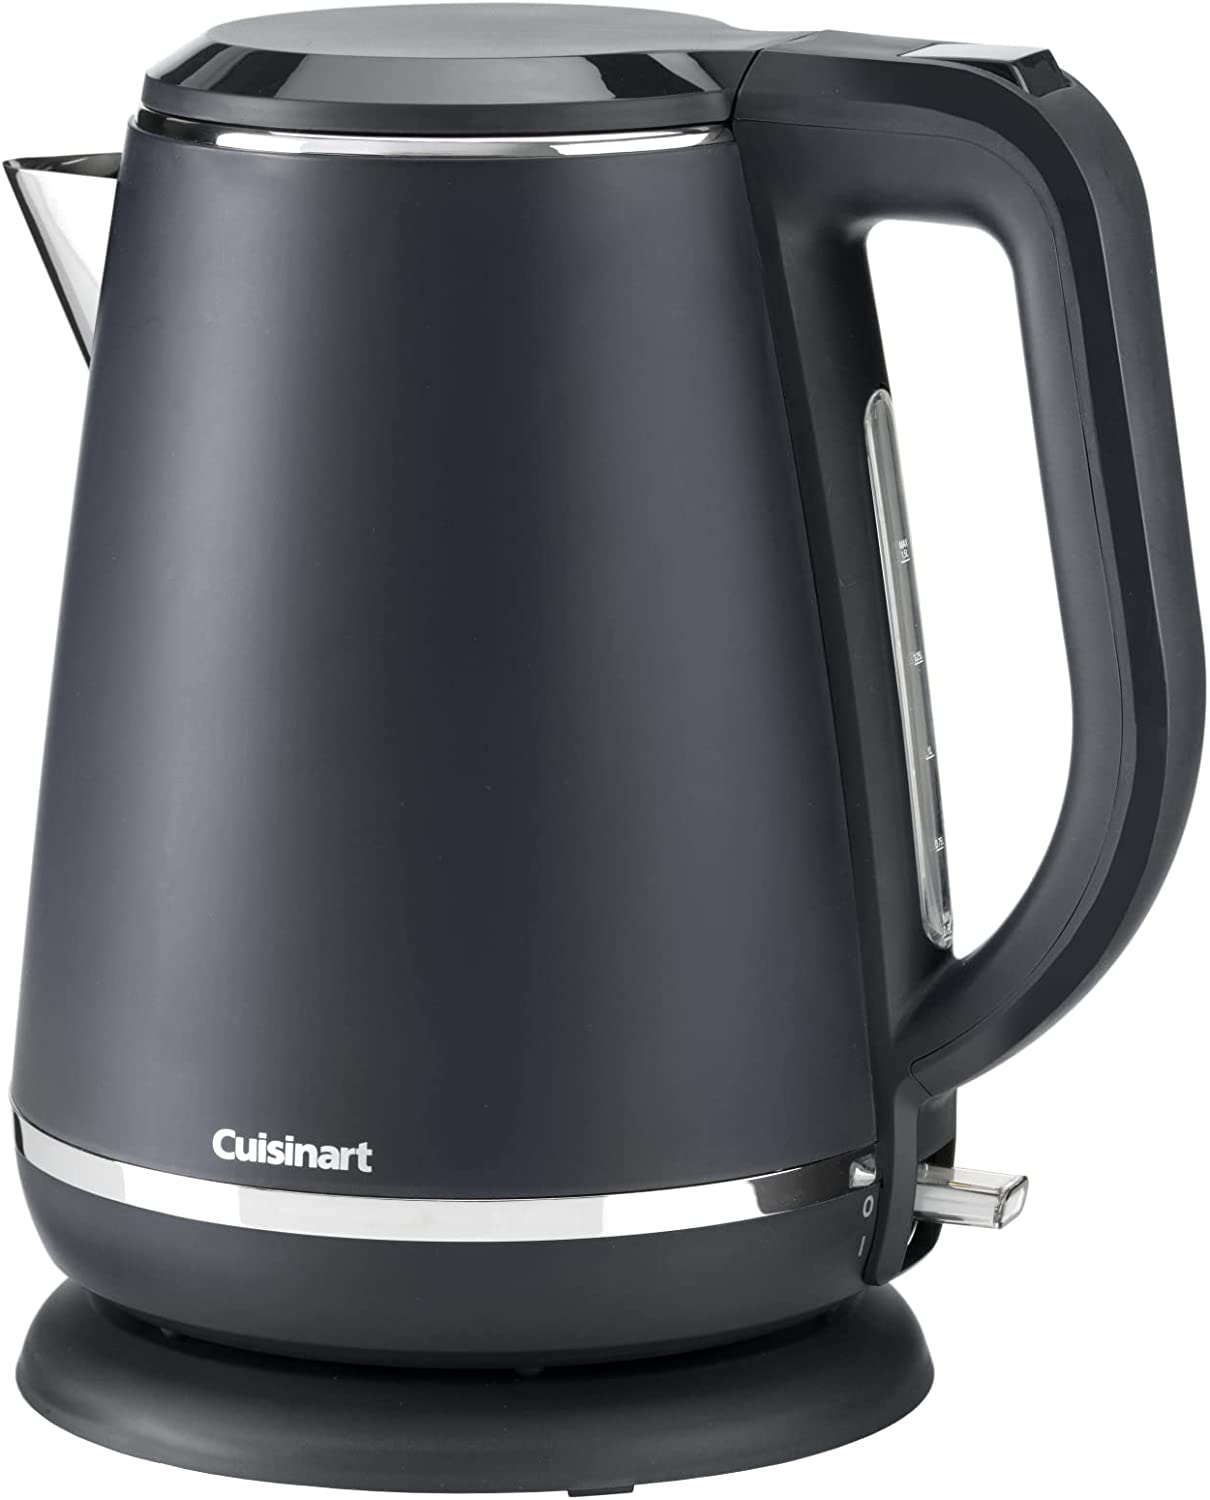 Cuisinart CJK780E Kettle, 3KW for Super Fast Boiling, High-Quality Workmanship, Stainless Steel Interior, 0.5 L - 1.5 L Capacity, Slate, Grey